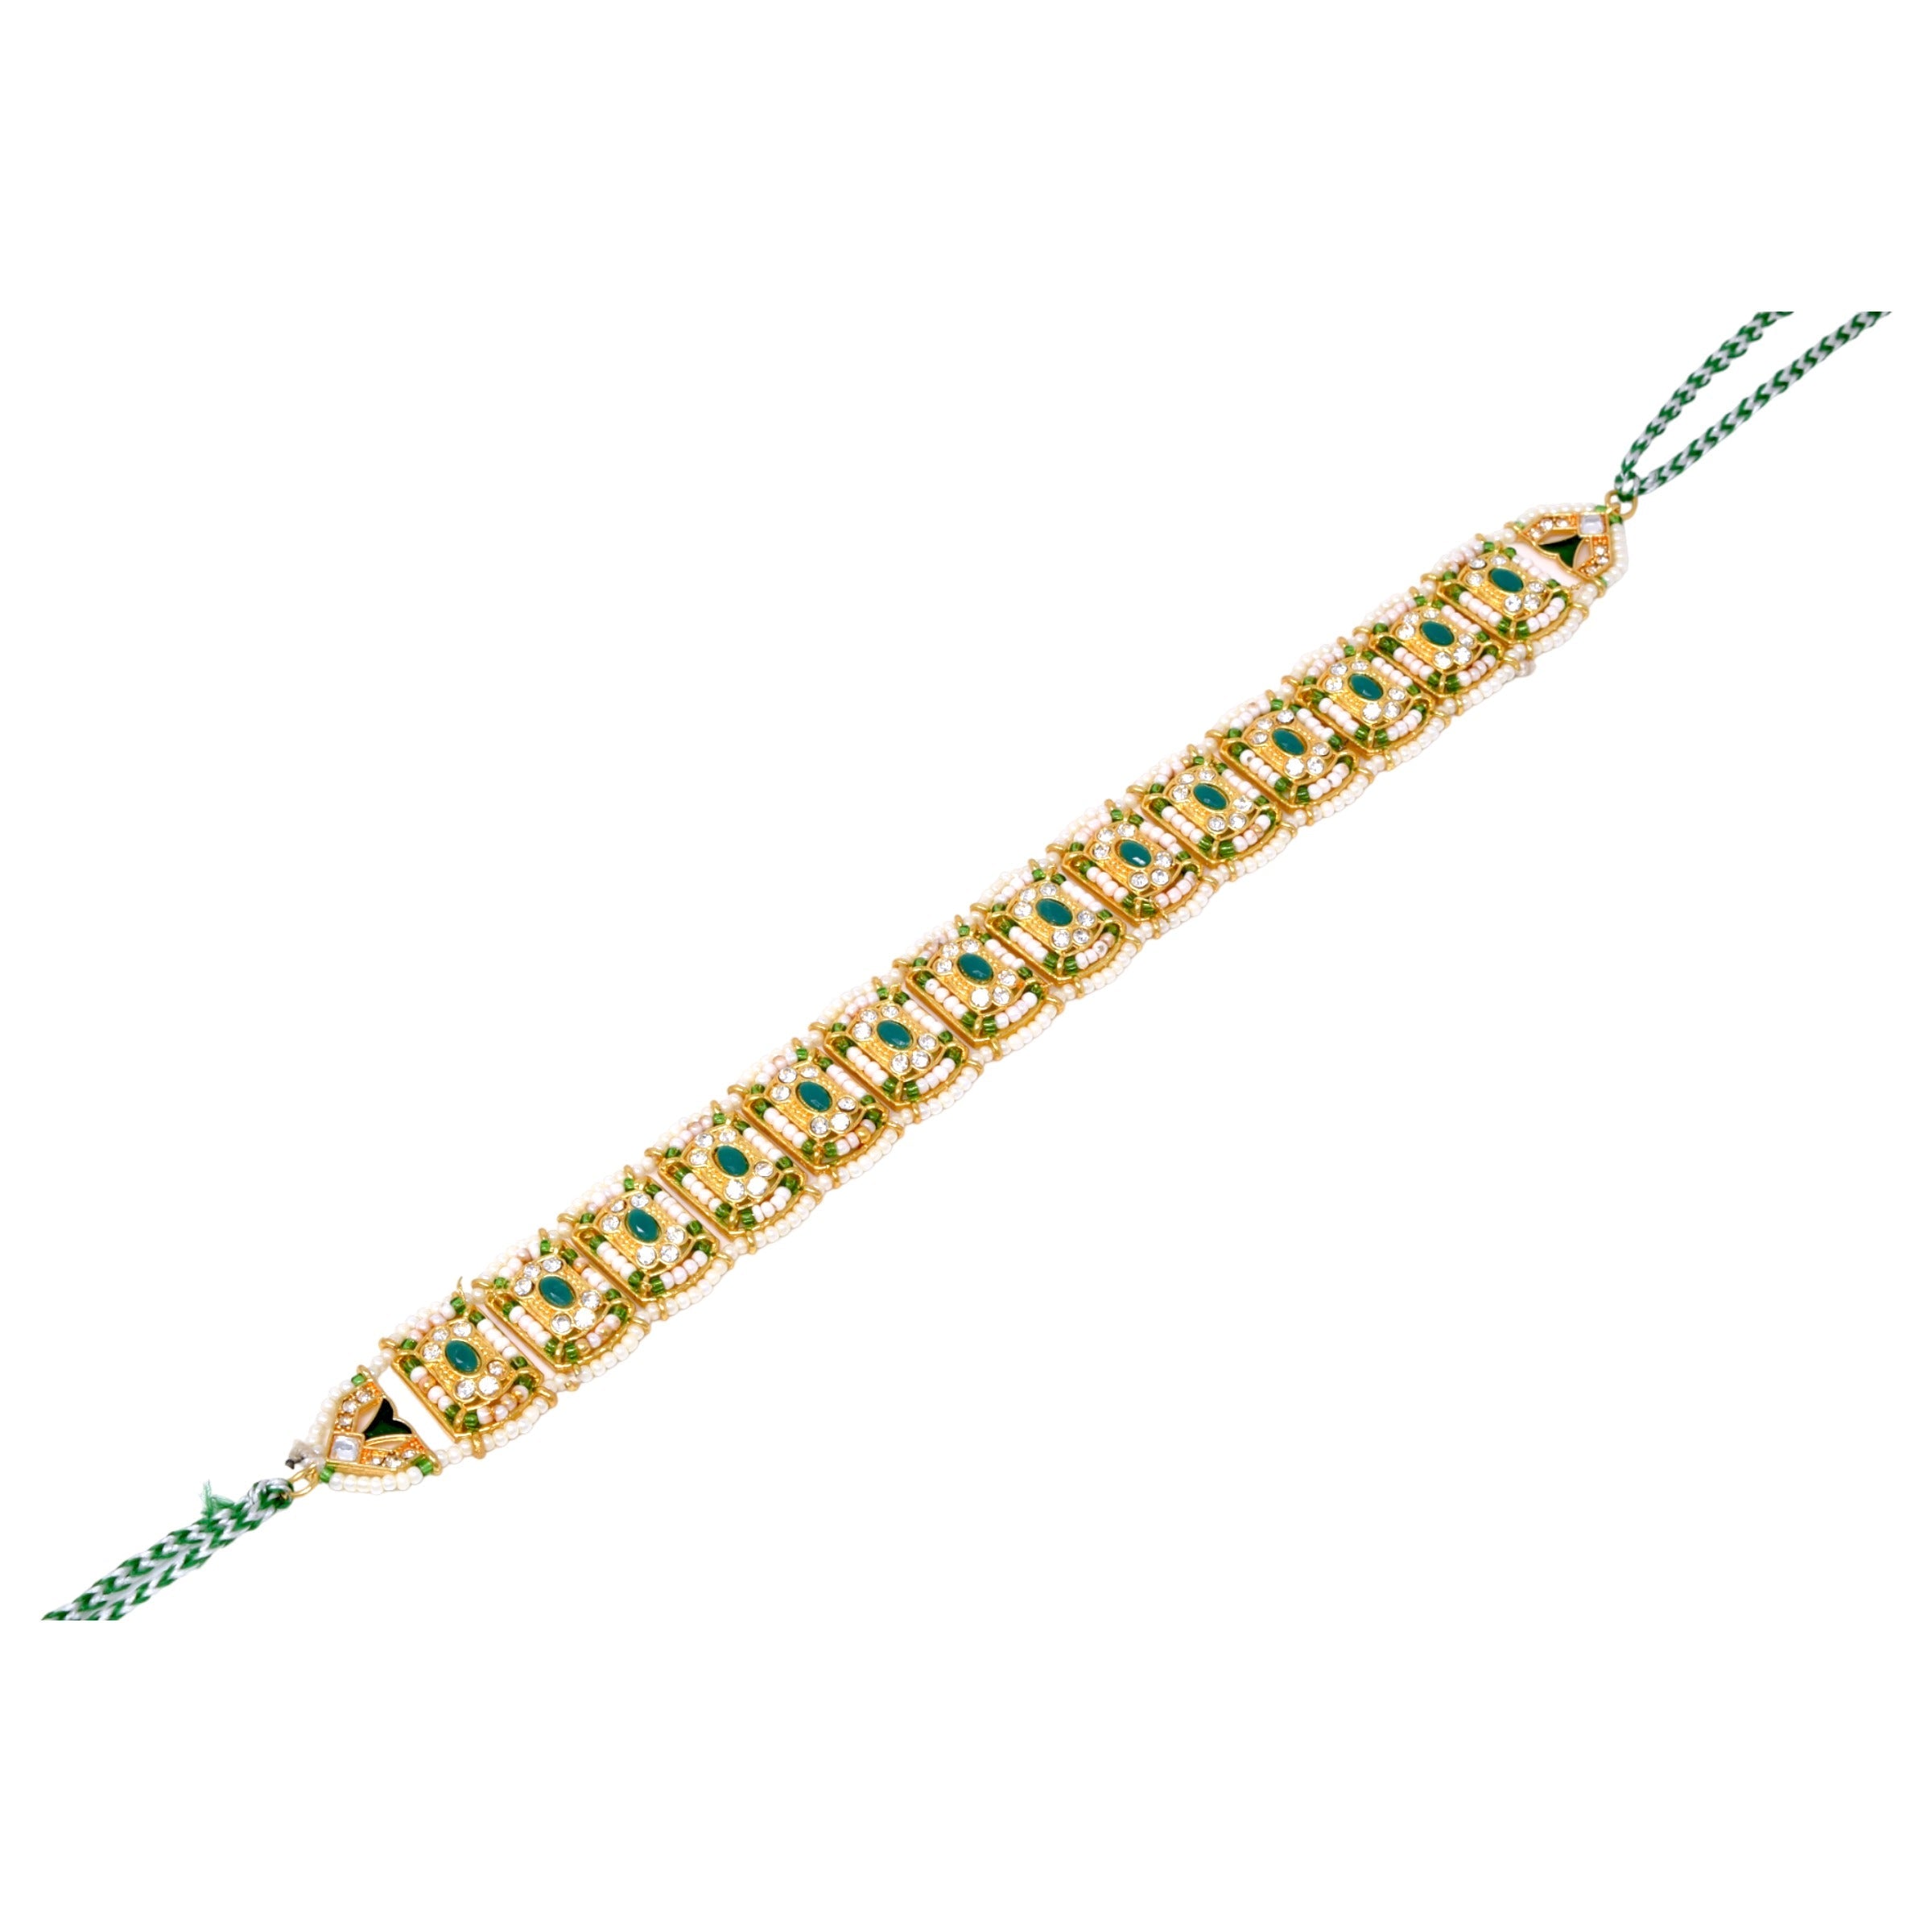 Elegant Gold Mathapatti - Traditional Indian Head Ornament for Weddings & Special Occasions